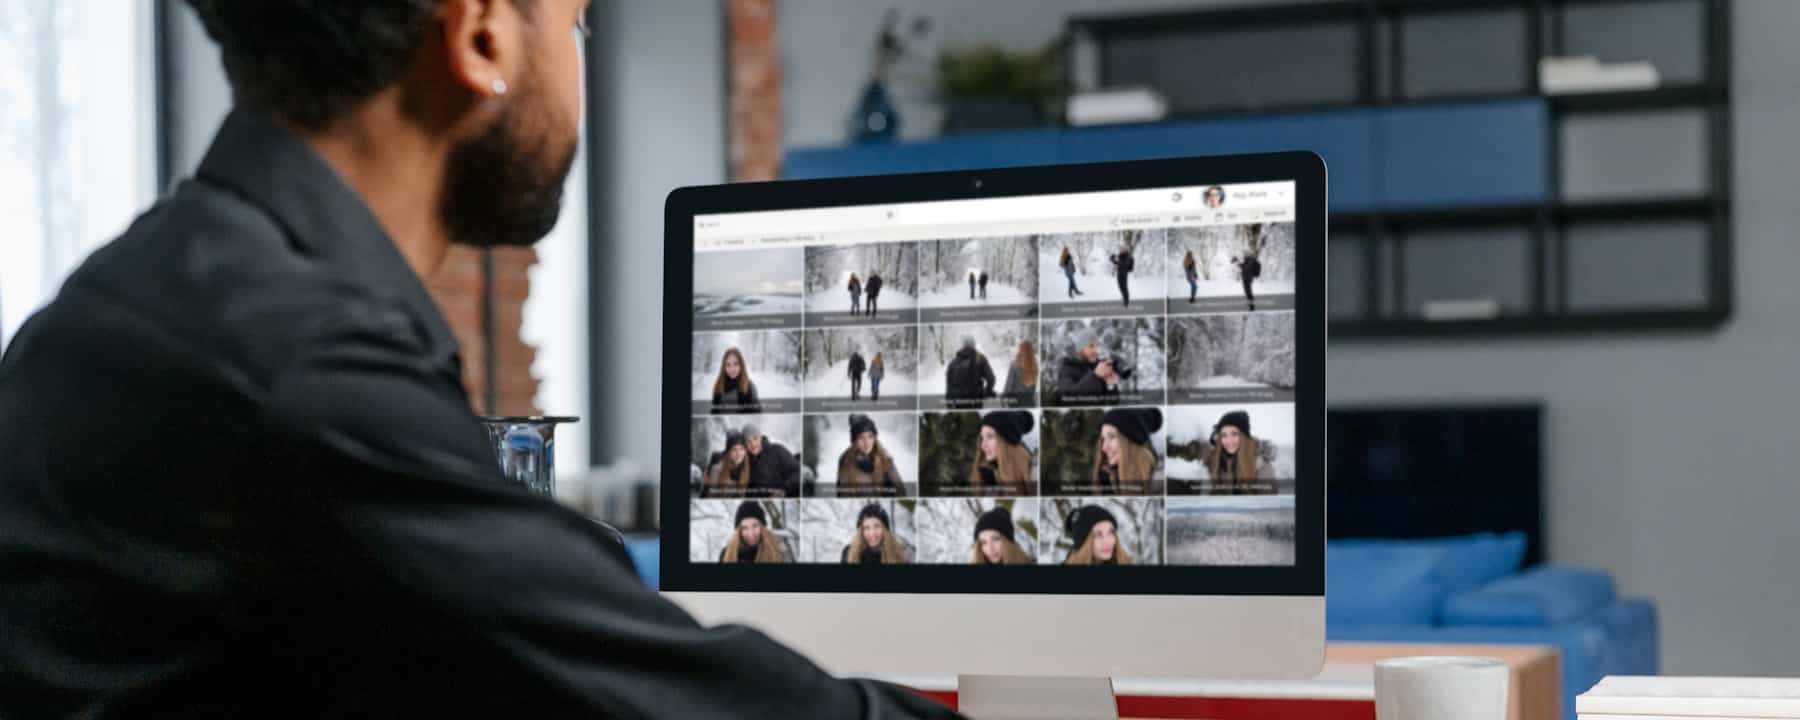 Employee manages photos on Mac - symbol image for collecting photos from groups